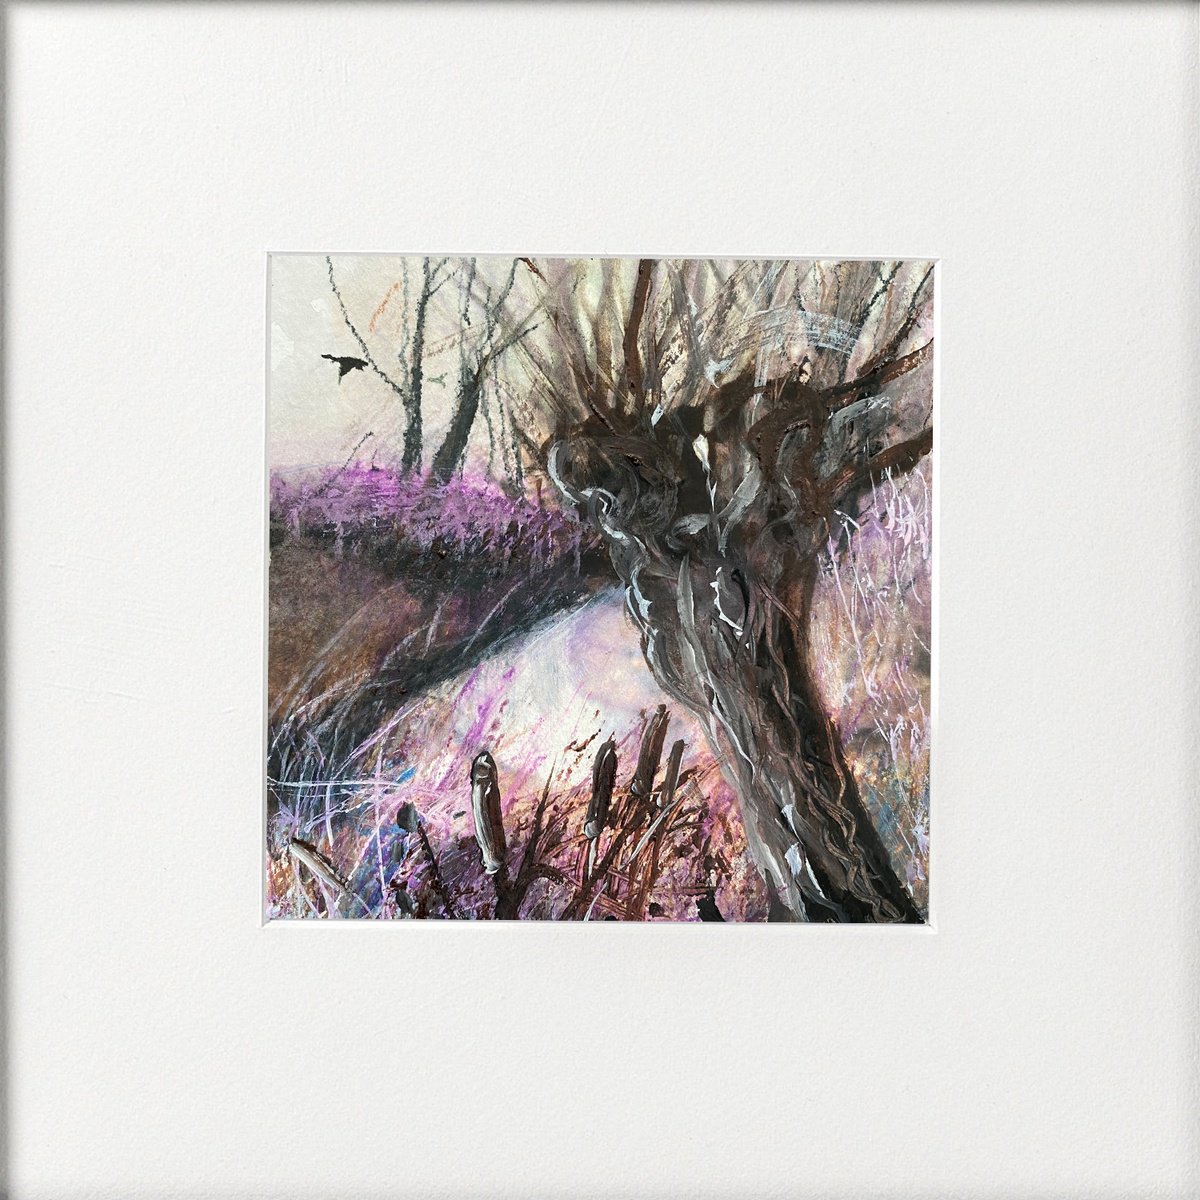 Seasons -  Winter Pollarded Willow by Stream by Teresa Tanner